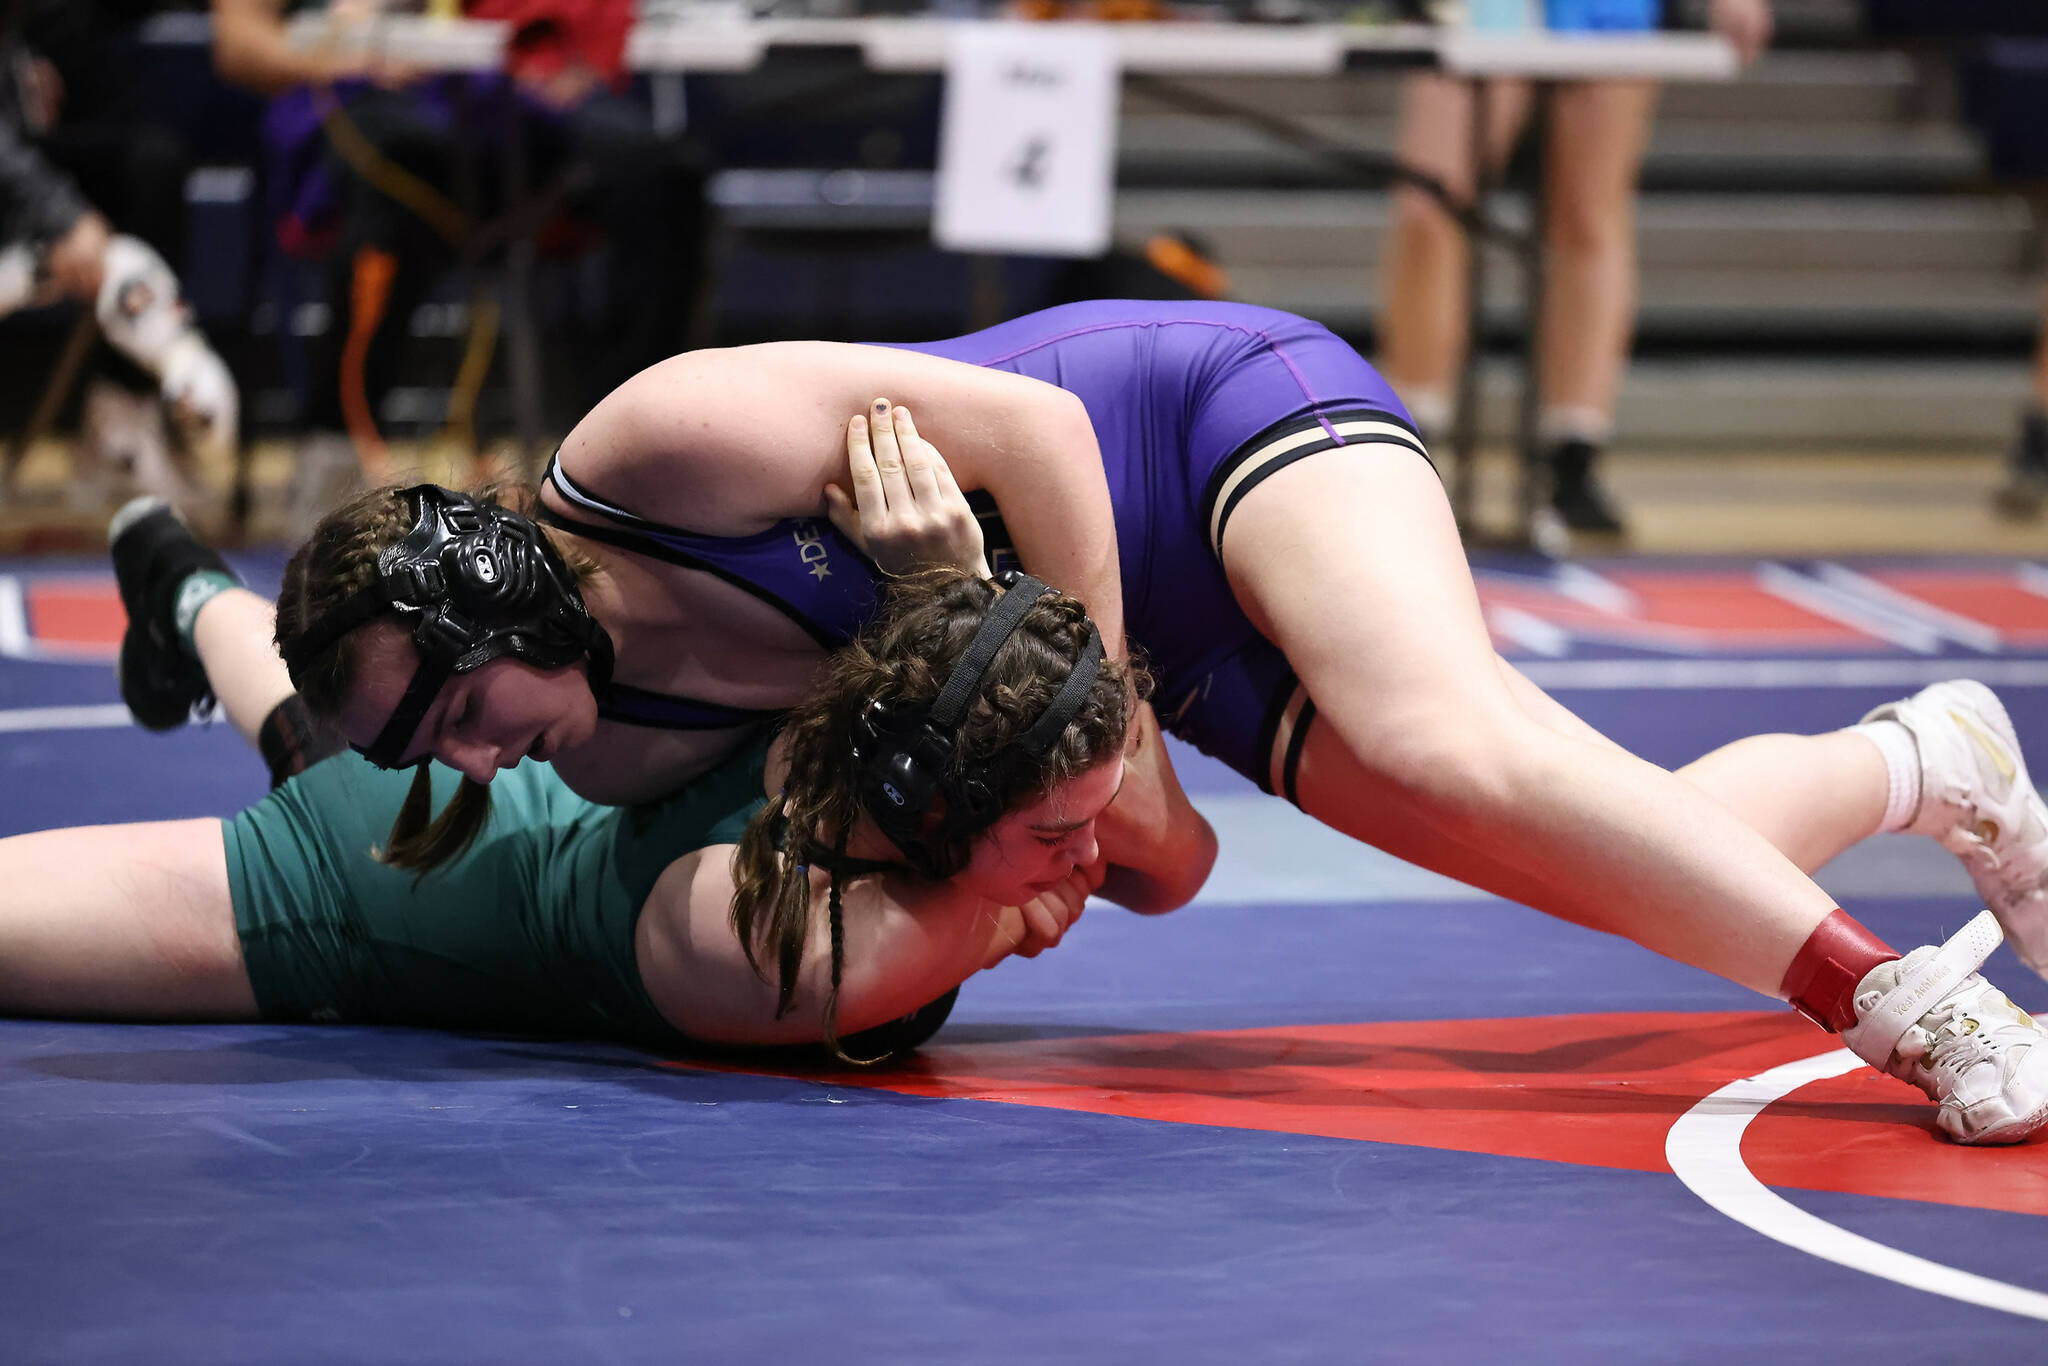 Photo by John Fisken
Zoe Beeman pins an opponent at the sub-regional tournament Feb. 3. Beeman placed second in her weight class and qualified for the regional tournament Saturday.